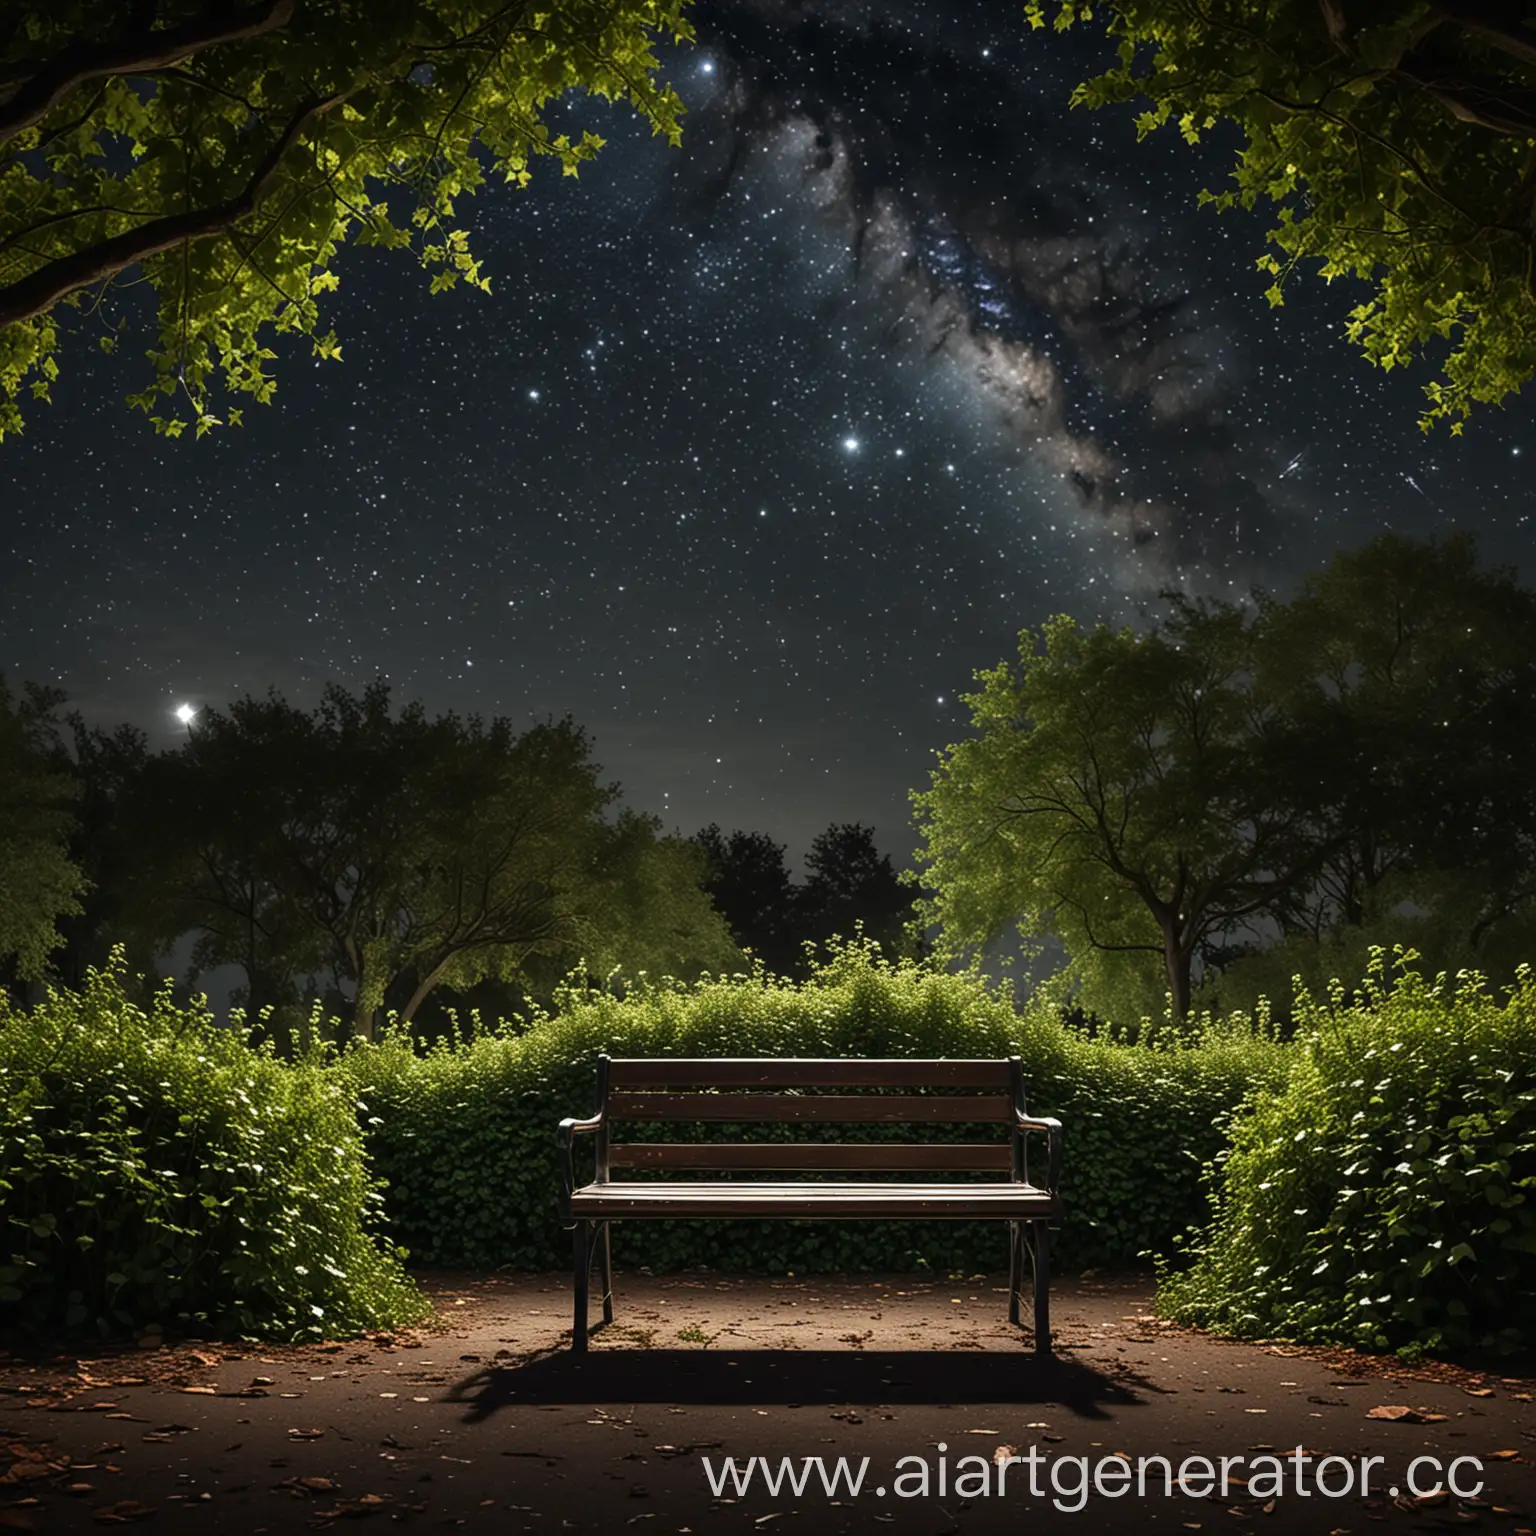 Empty-Park-Bench-Covered-in-Ivy-under-Starry-Night-Sky